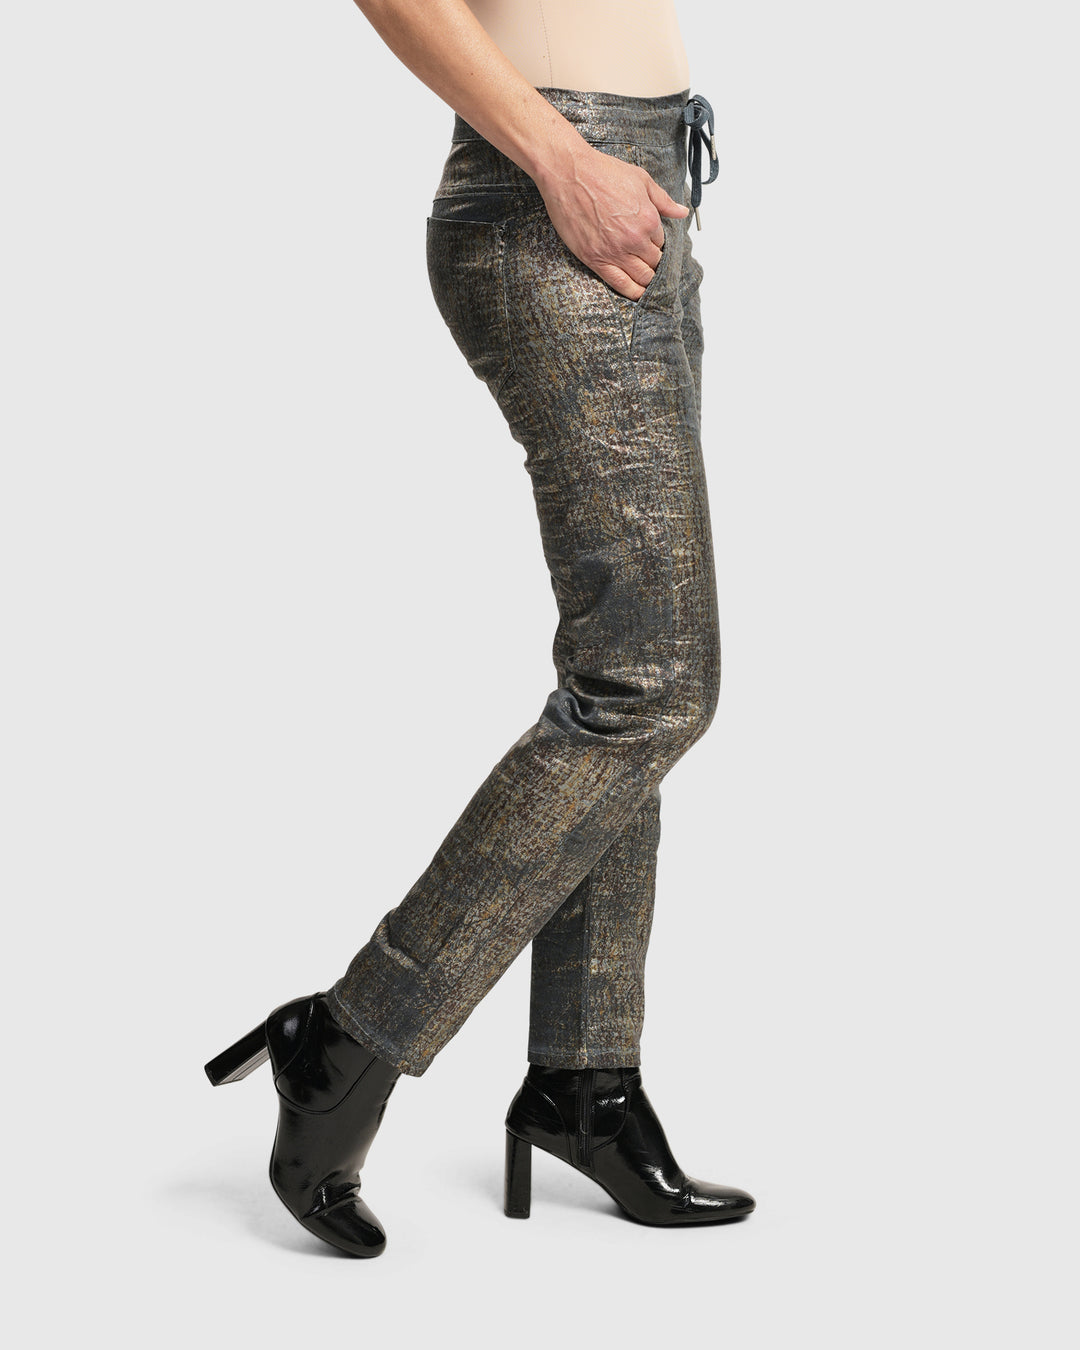 An ALEMBIKA stretch-wearing woman over 50 in Iconic Jeans Desires, Petrol pants.